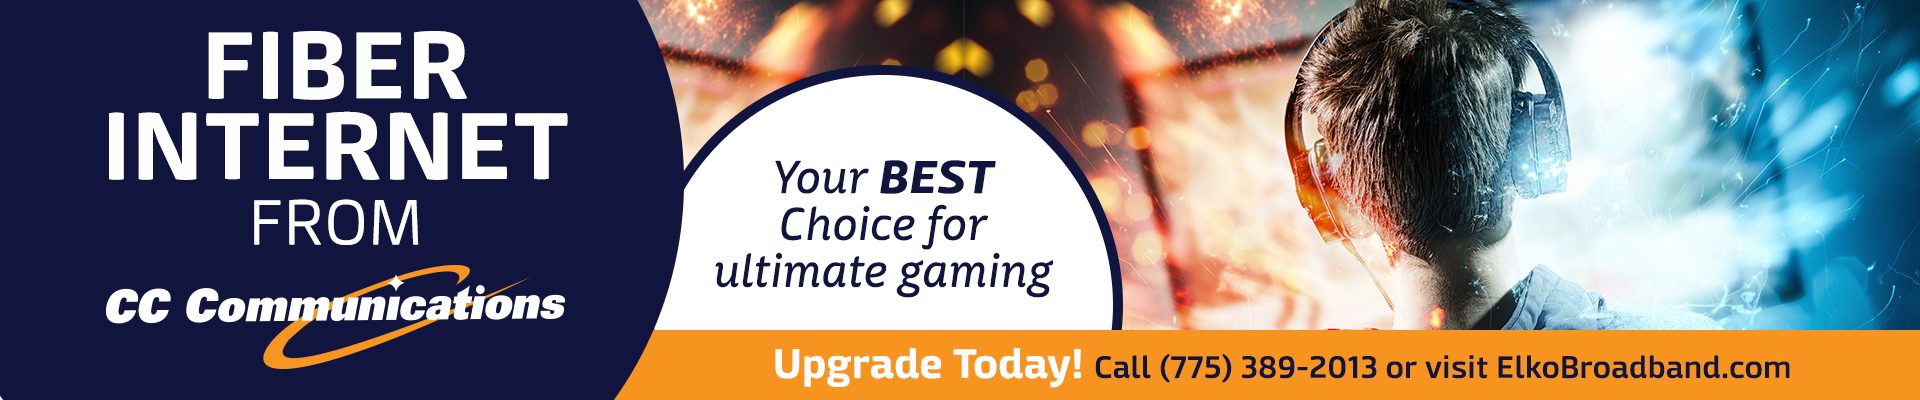 Fiber Internet from CC Communications. Your BEST Choice for Ultimate Gaming.